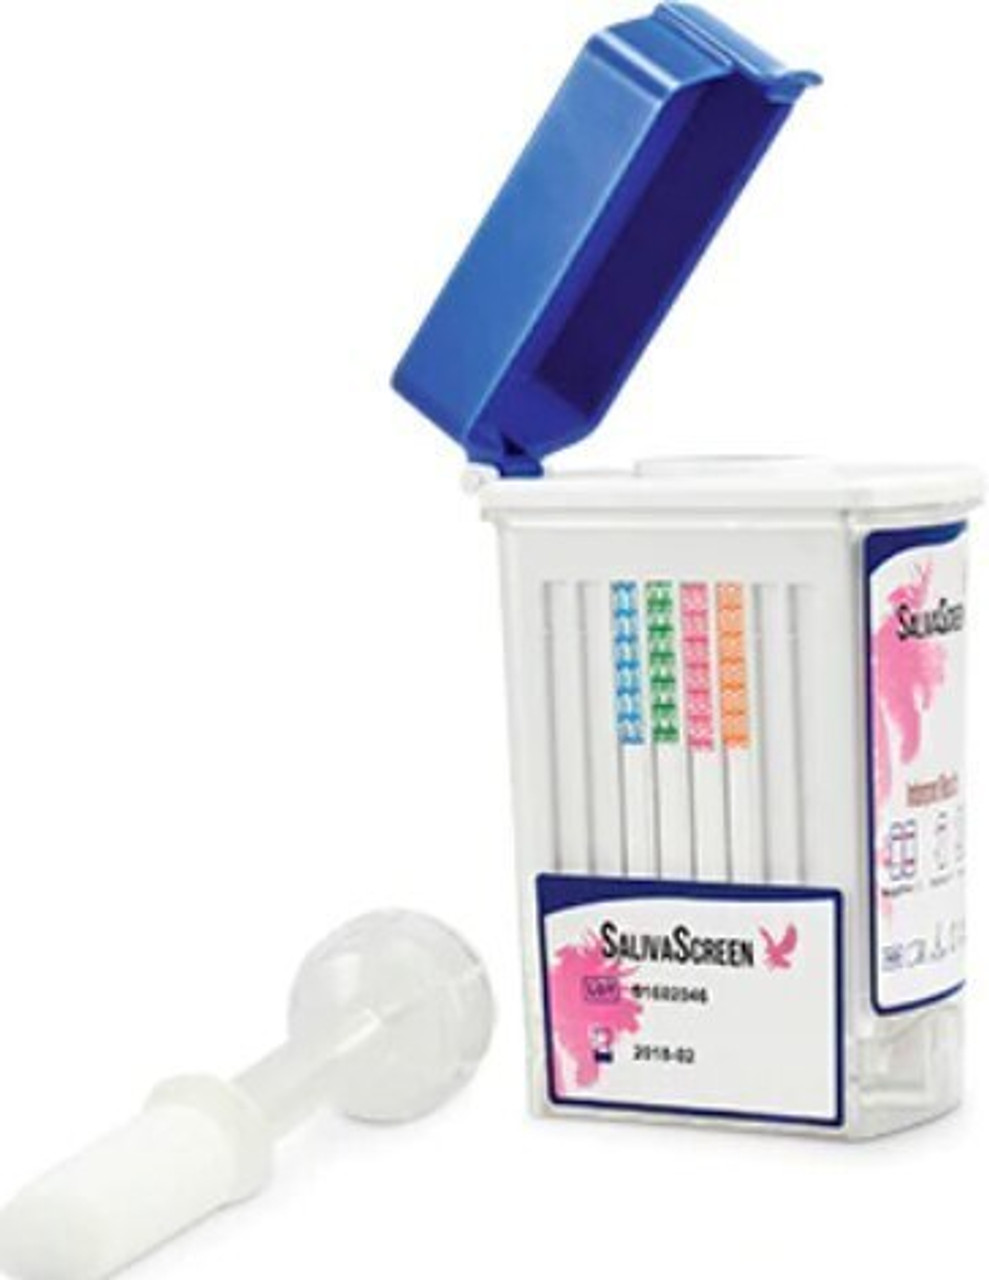 12 Panel SalivaScreen with Indicator Flip Top Oral Cube Drug Test 25/box